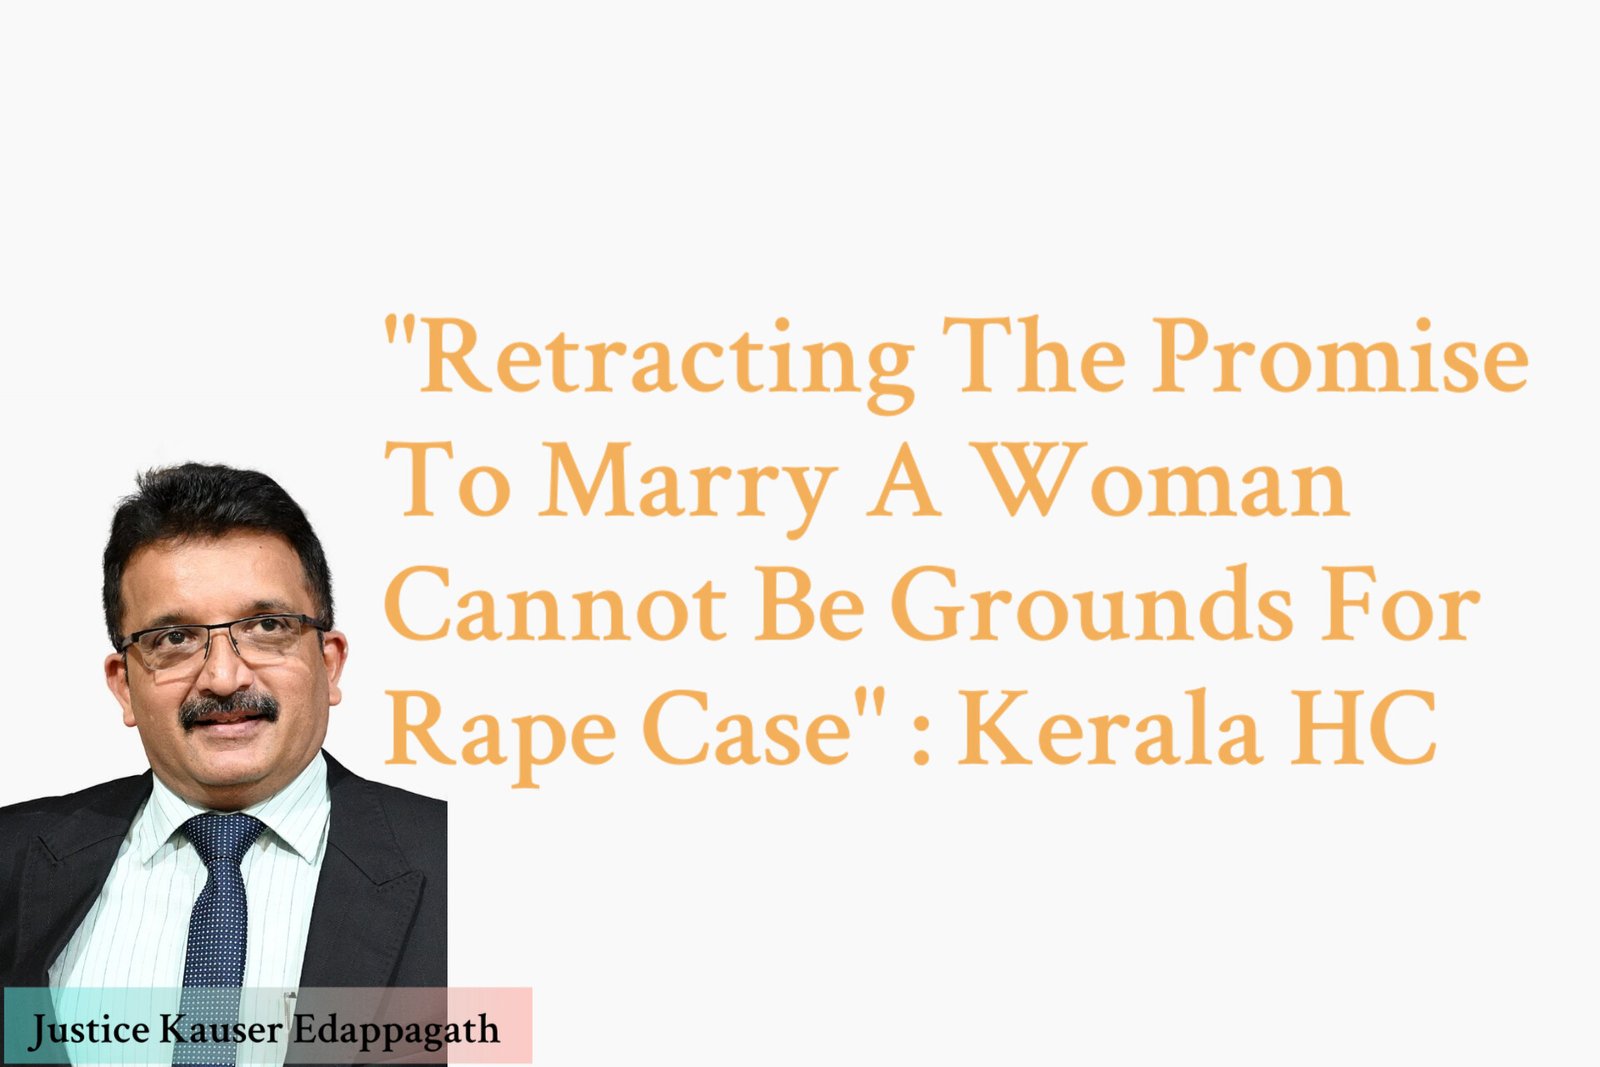 Retracting the promise to marry a woman cannot be grounds for rape cases Kerala HC photo